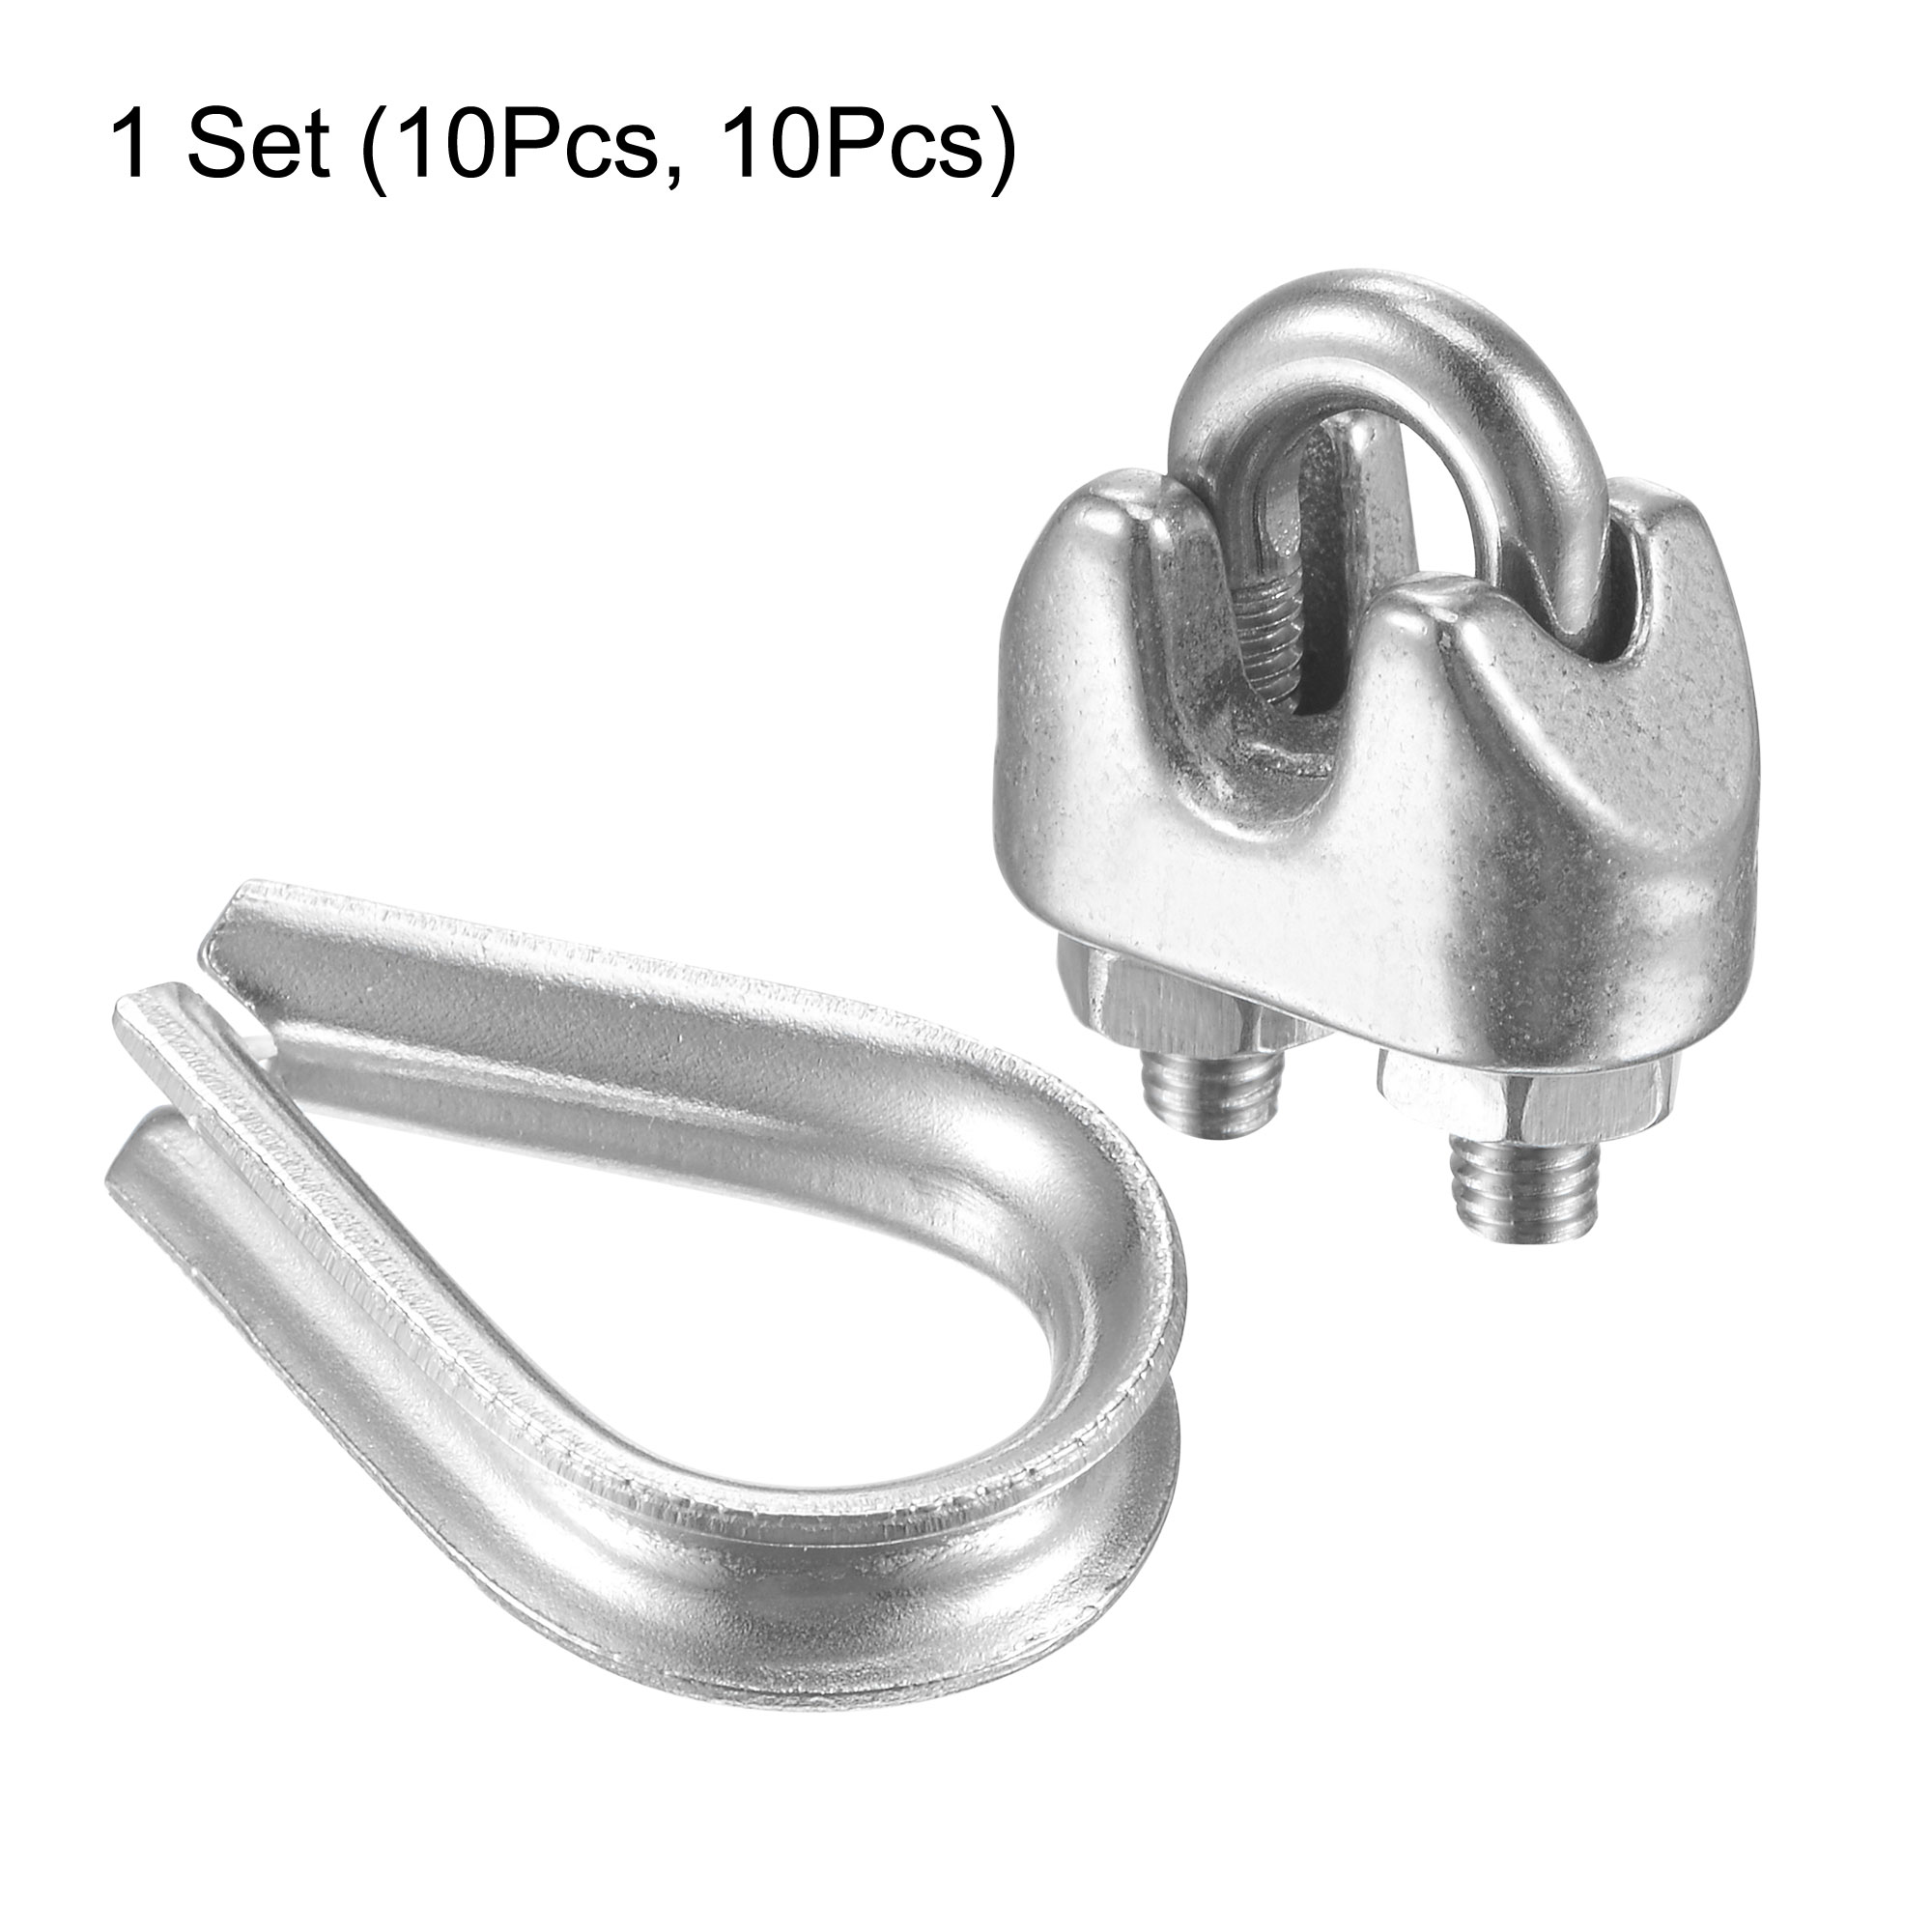 Uxcell M2 Stainless Steel Wire Rope Clip Kit, Included Rope Clamp 10 Pack Thimble Rigging 10 Pack - image 5 of 7